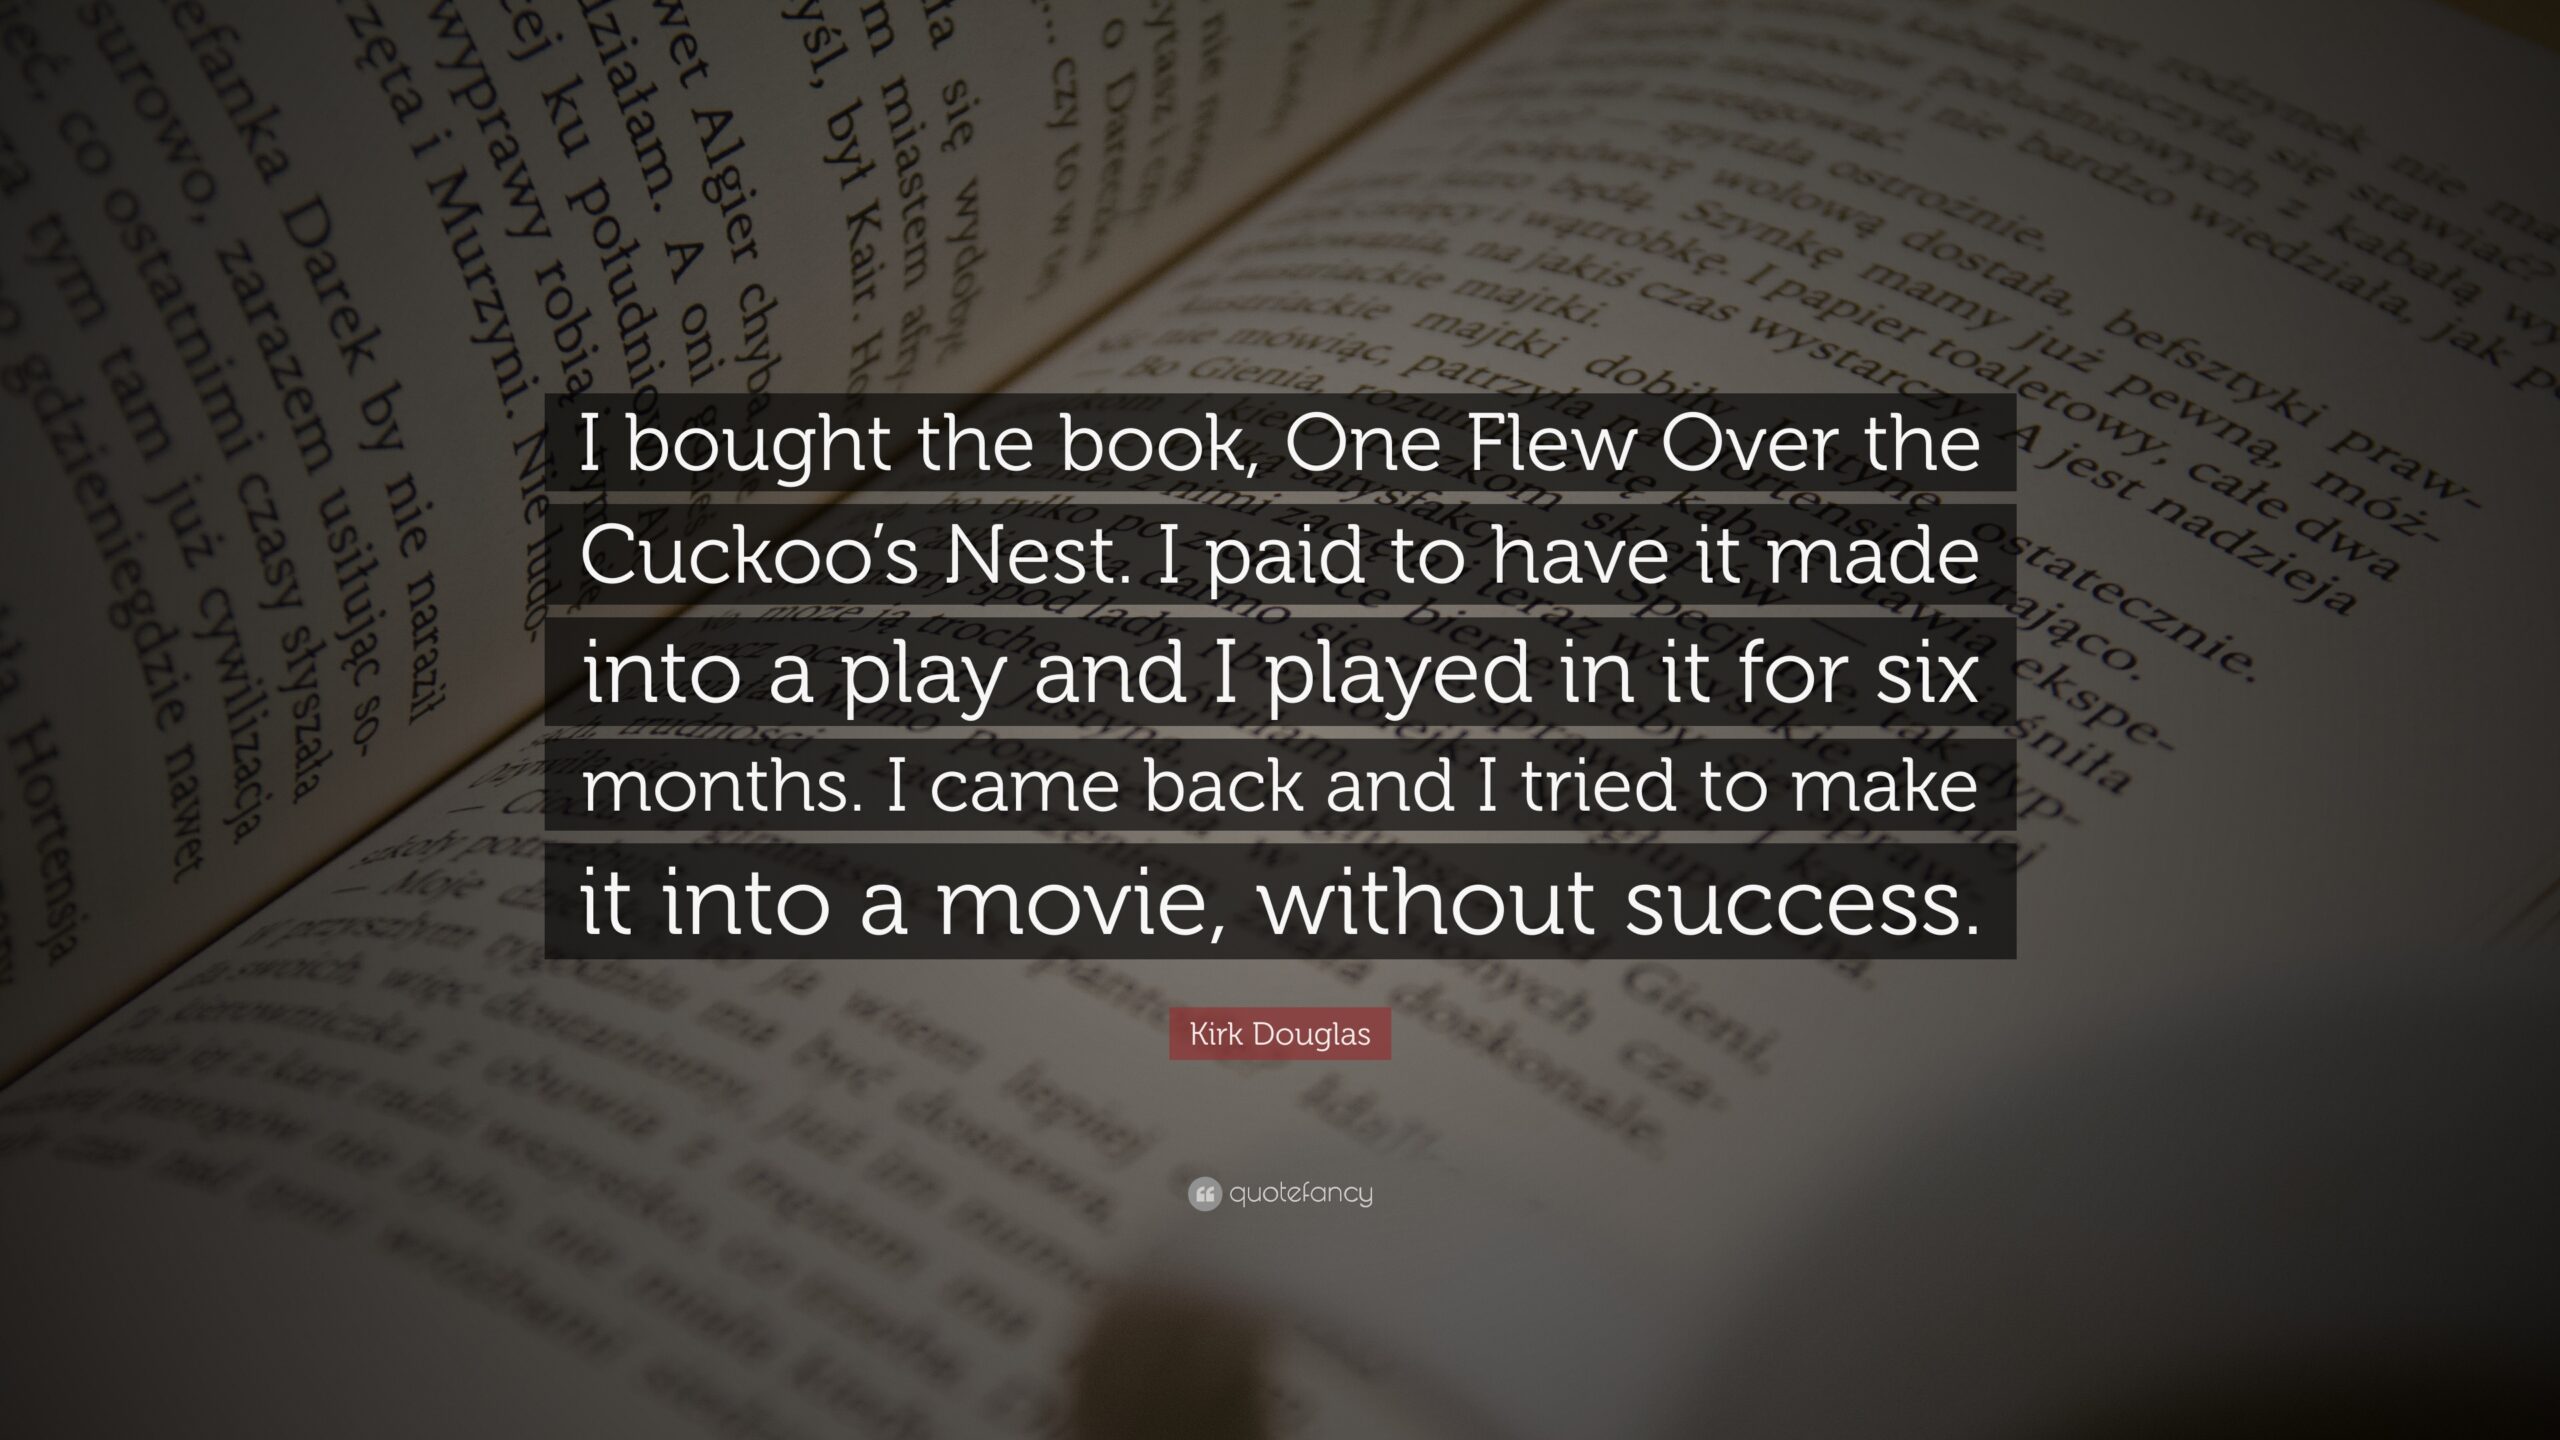 Kirk Douglas Quote “I bought the book, One Flew Over the Cuckoo’s